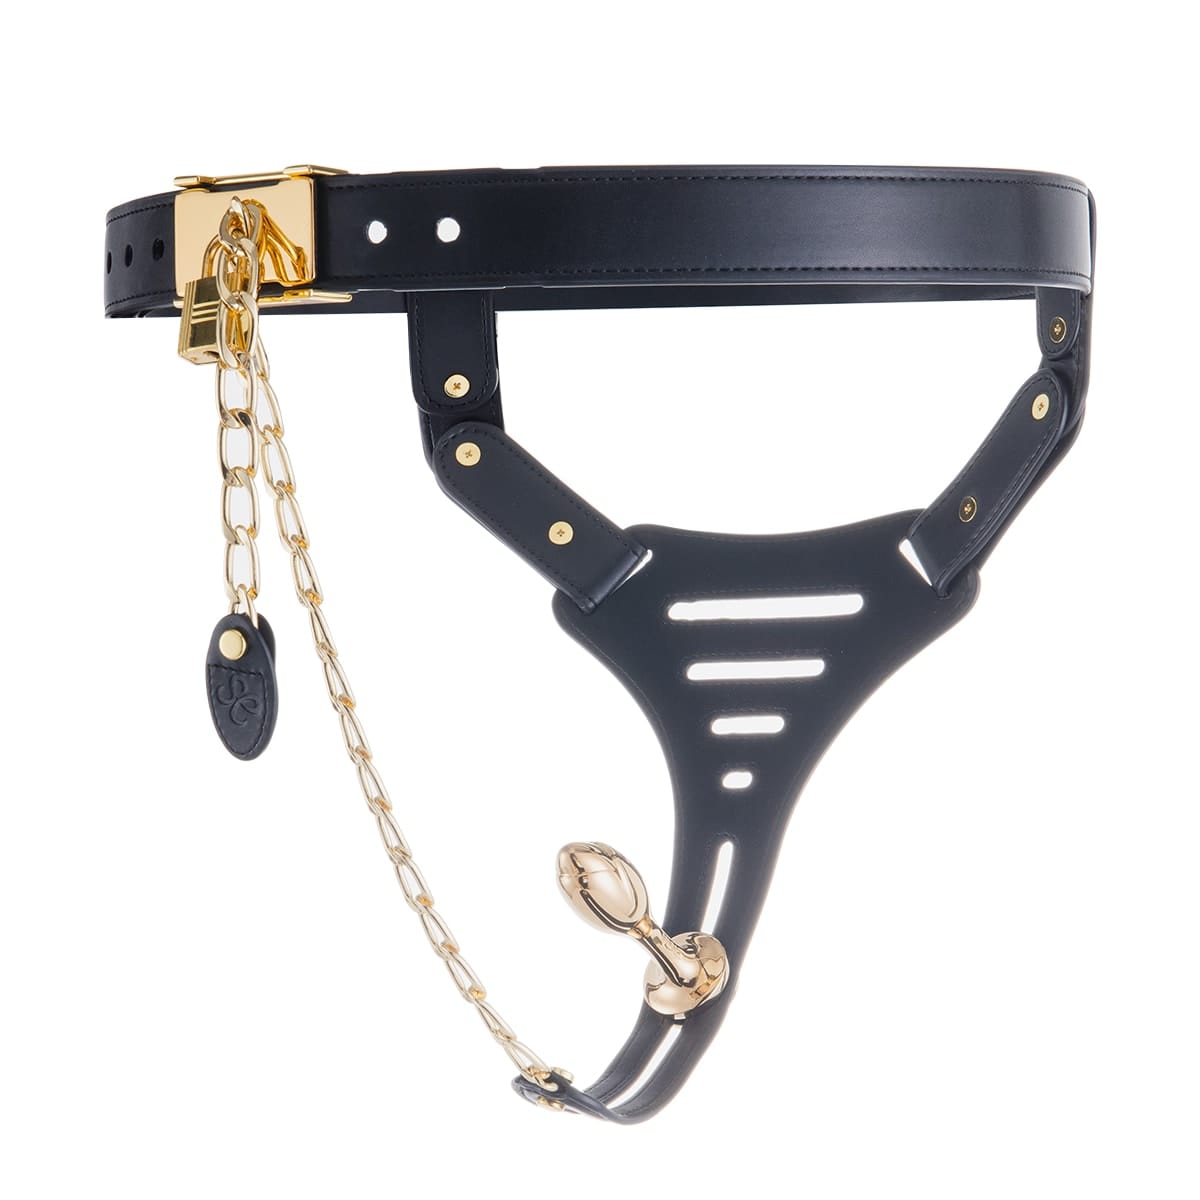 SEVANDA Female Chastity Belt - adjustable sizes for waists 26 to 43, designed for comfort and pleasure.